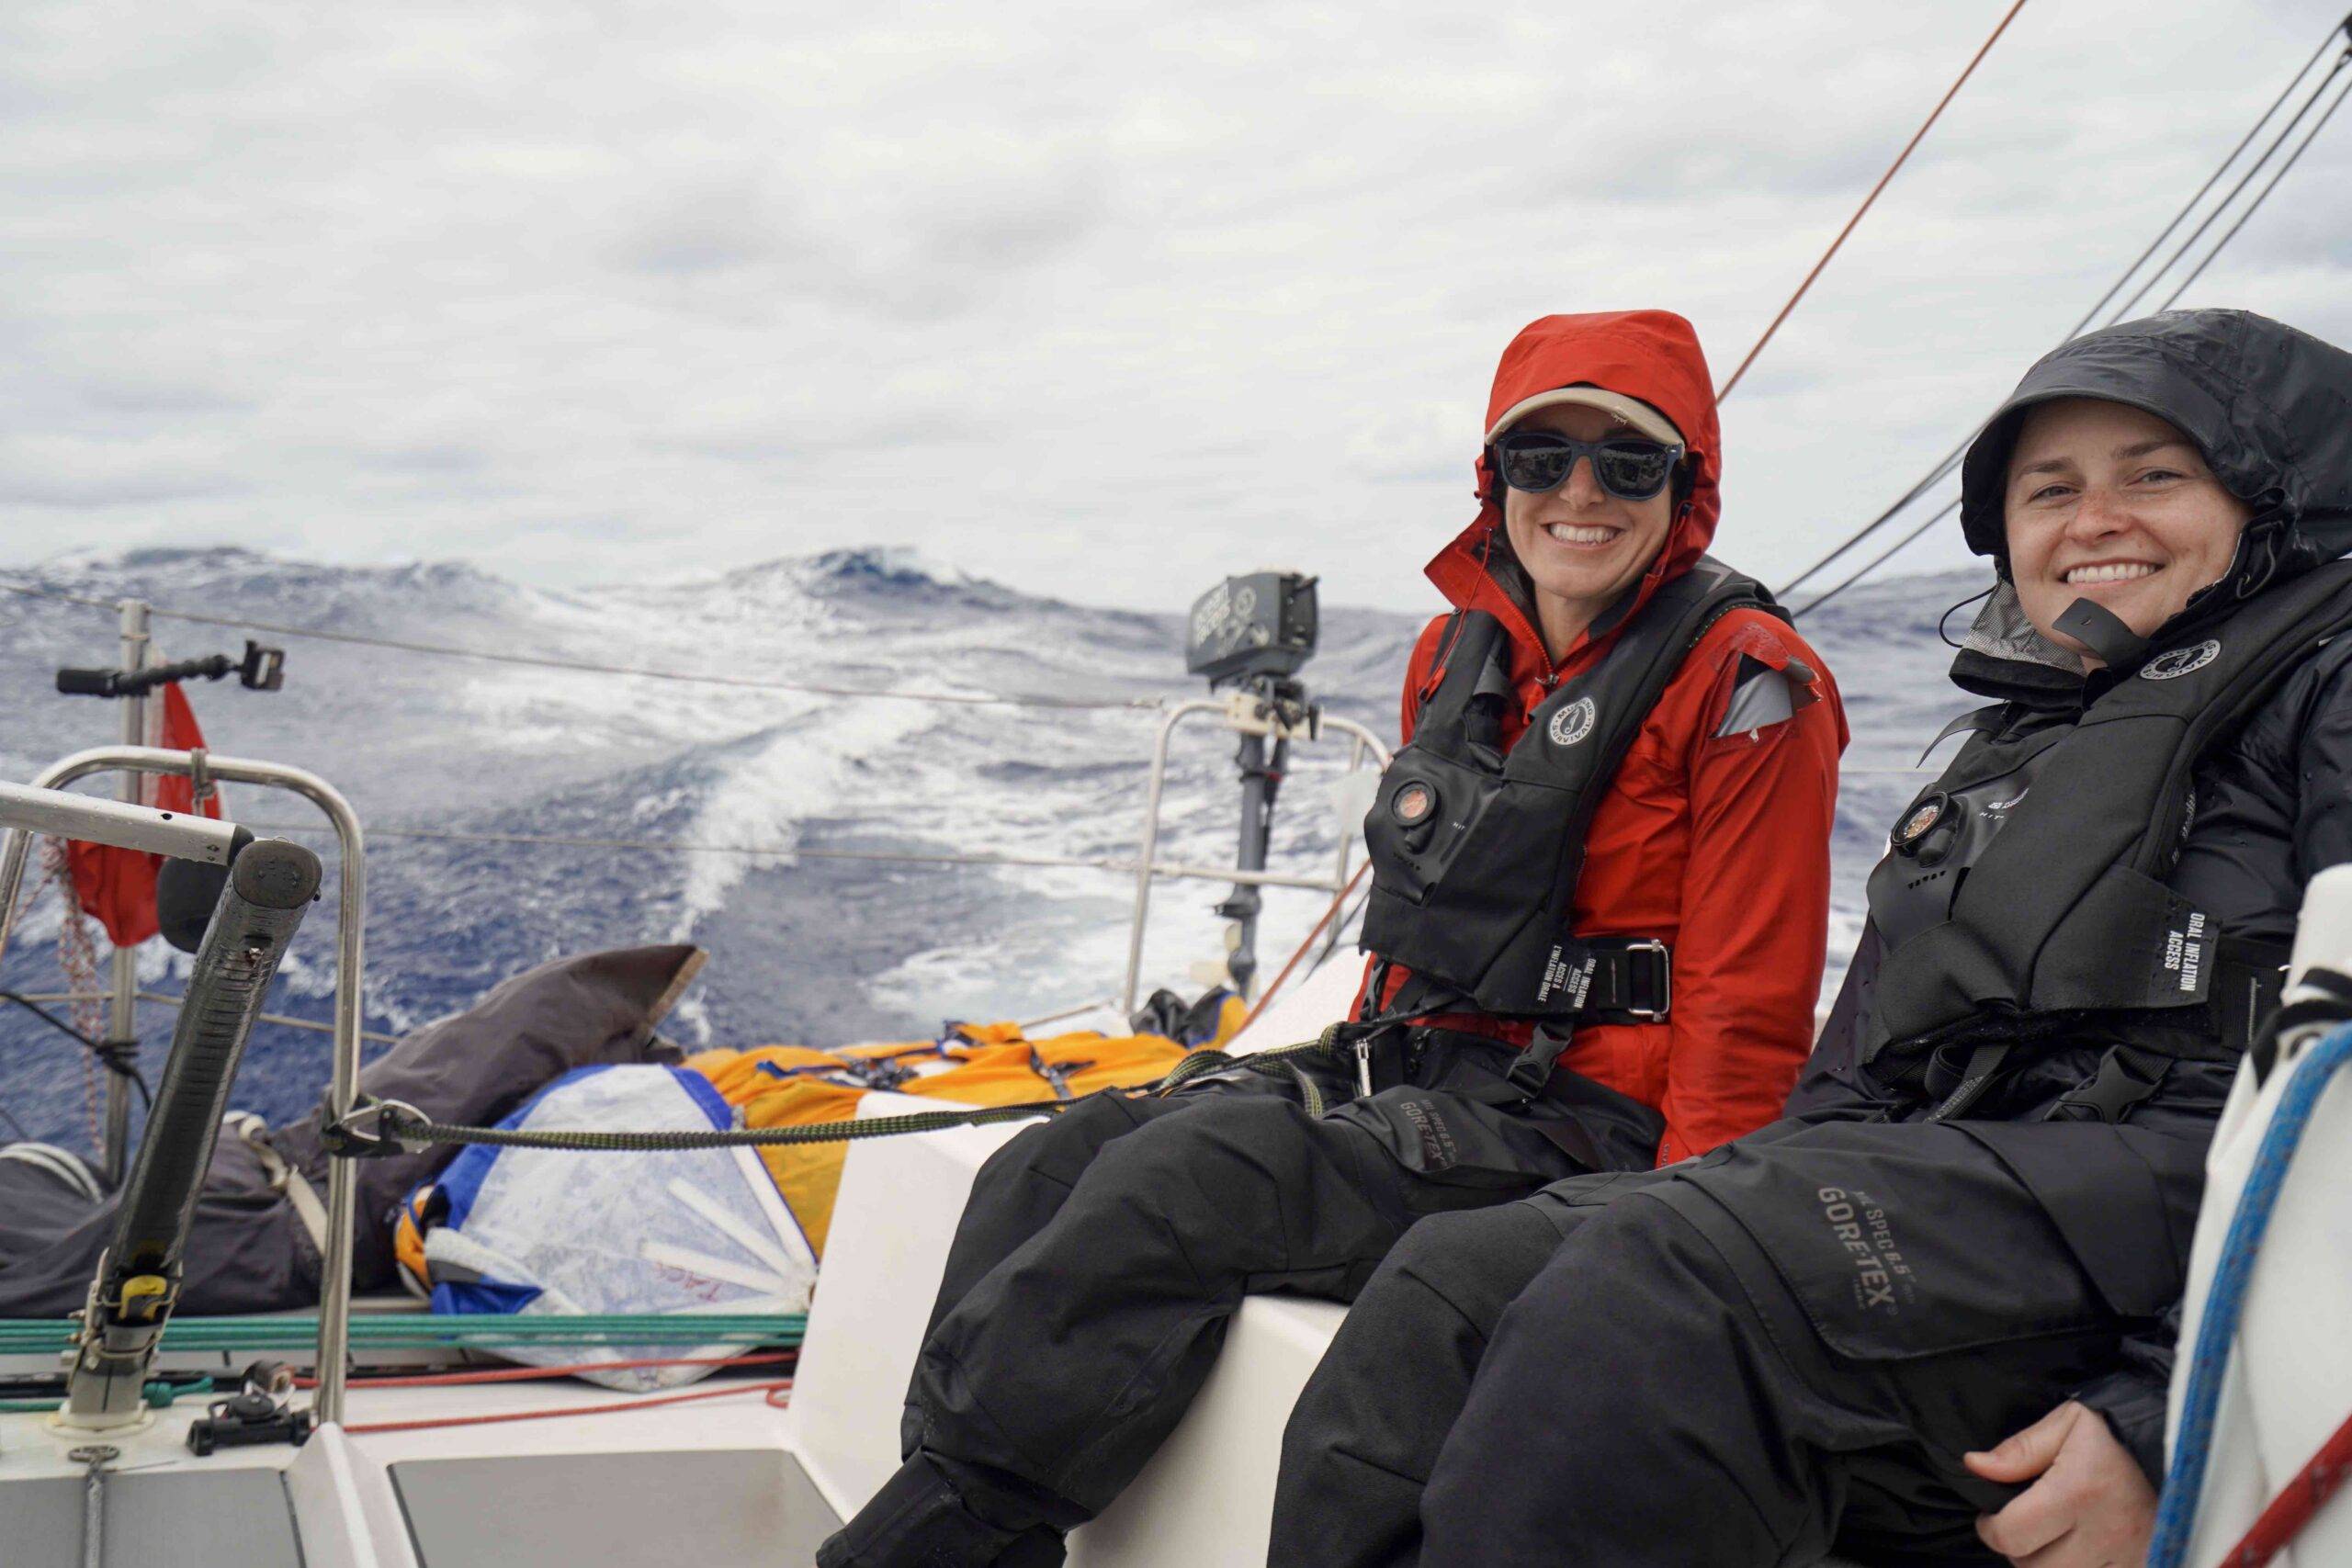 WOW: Empowering Women to Sail Offshore